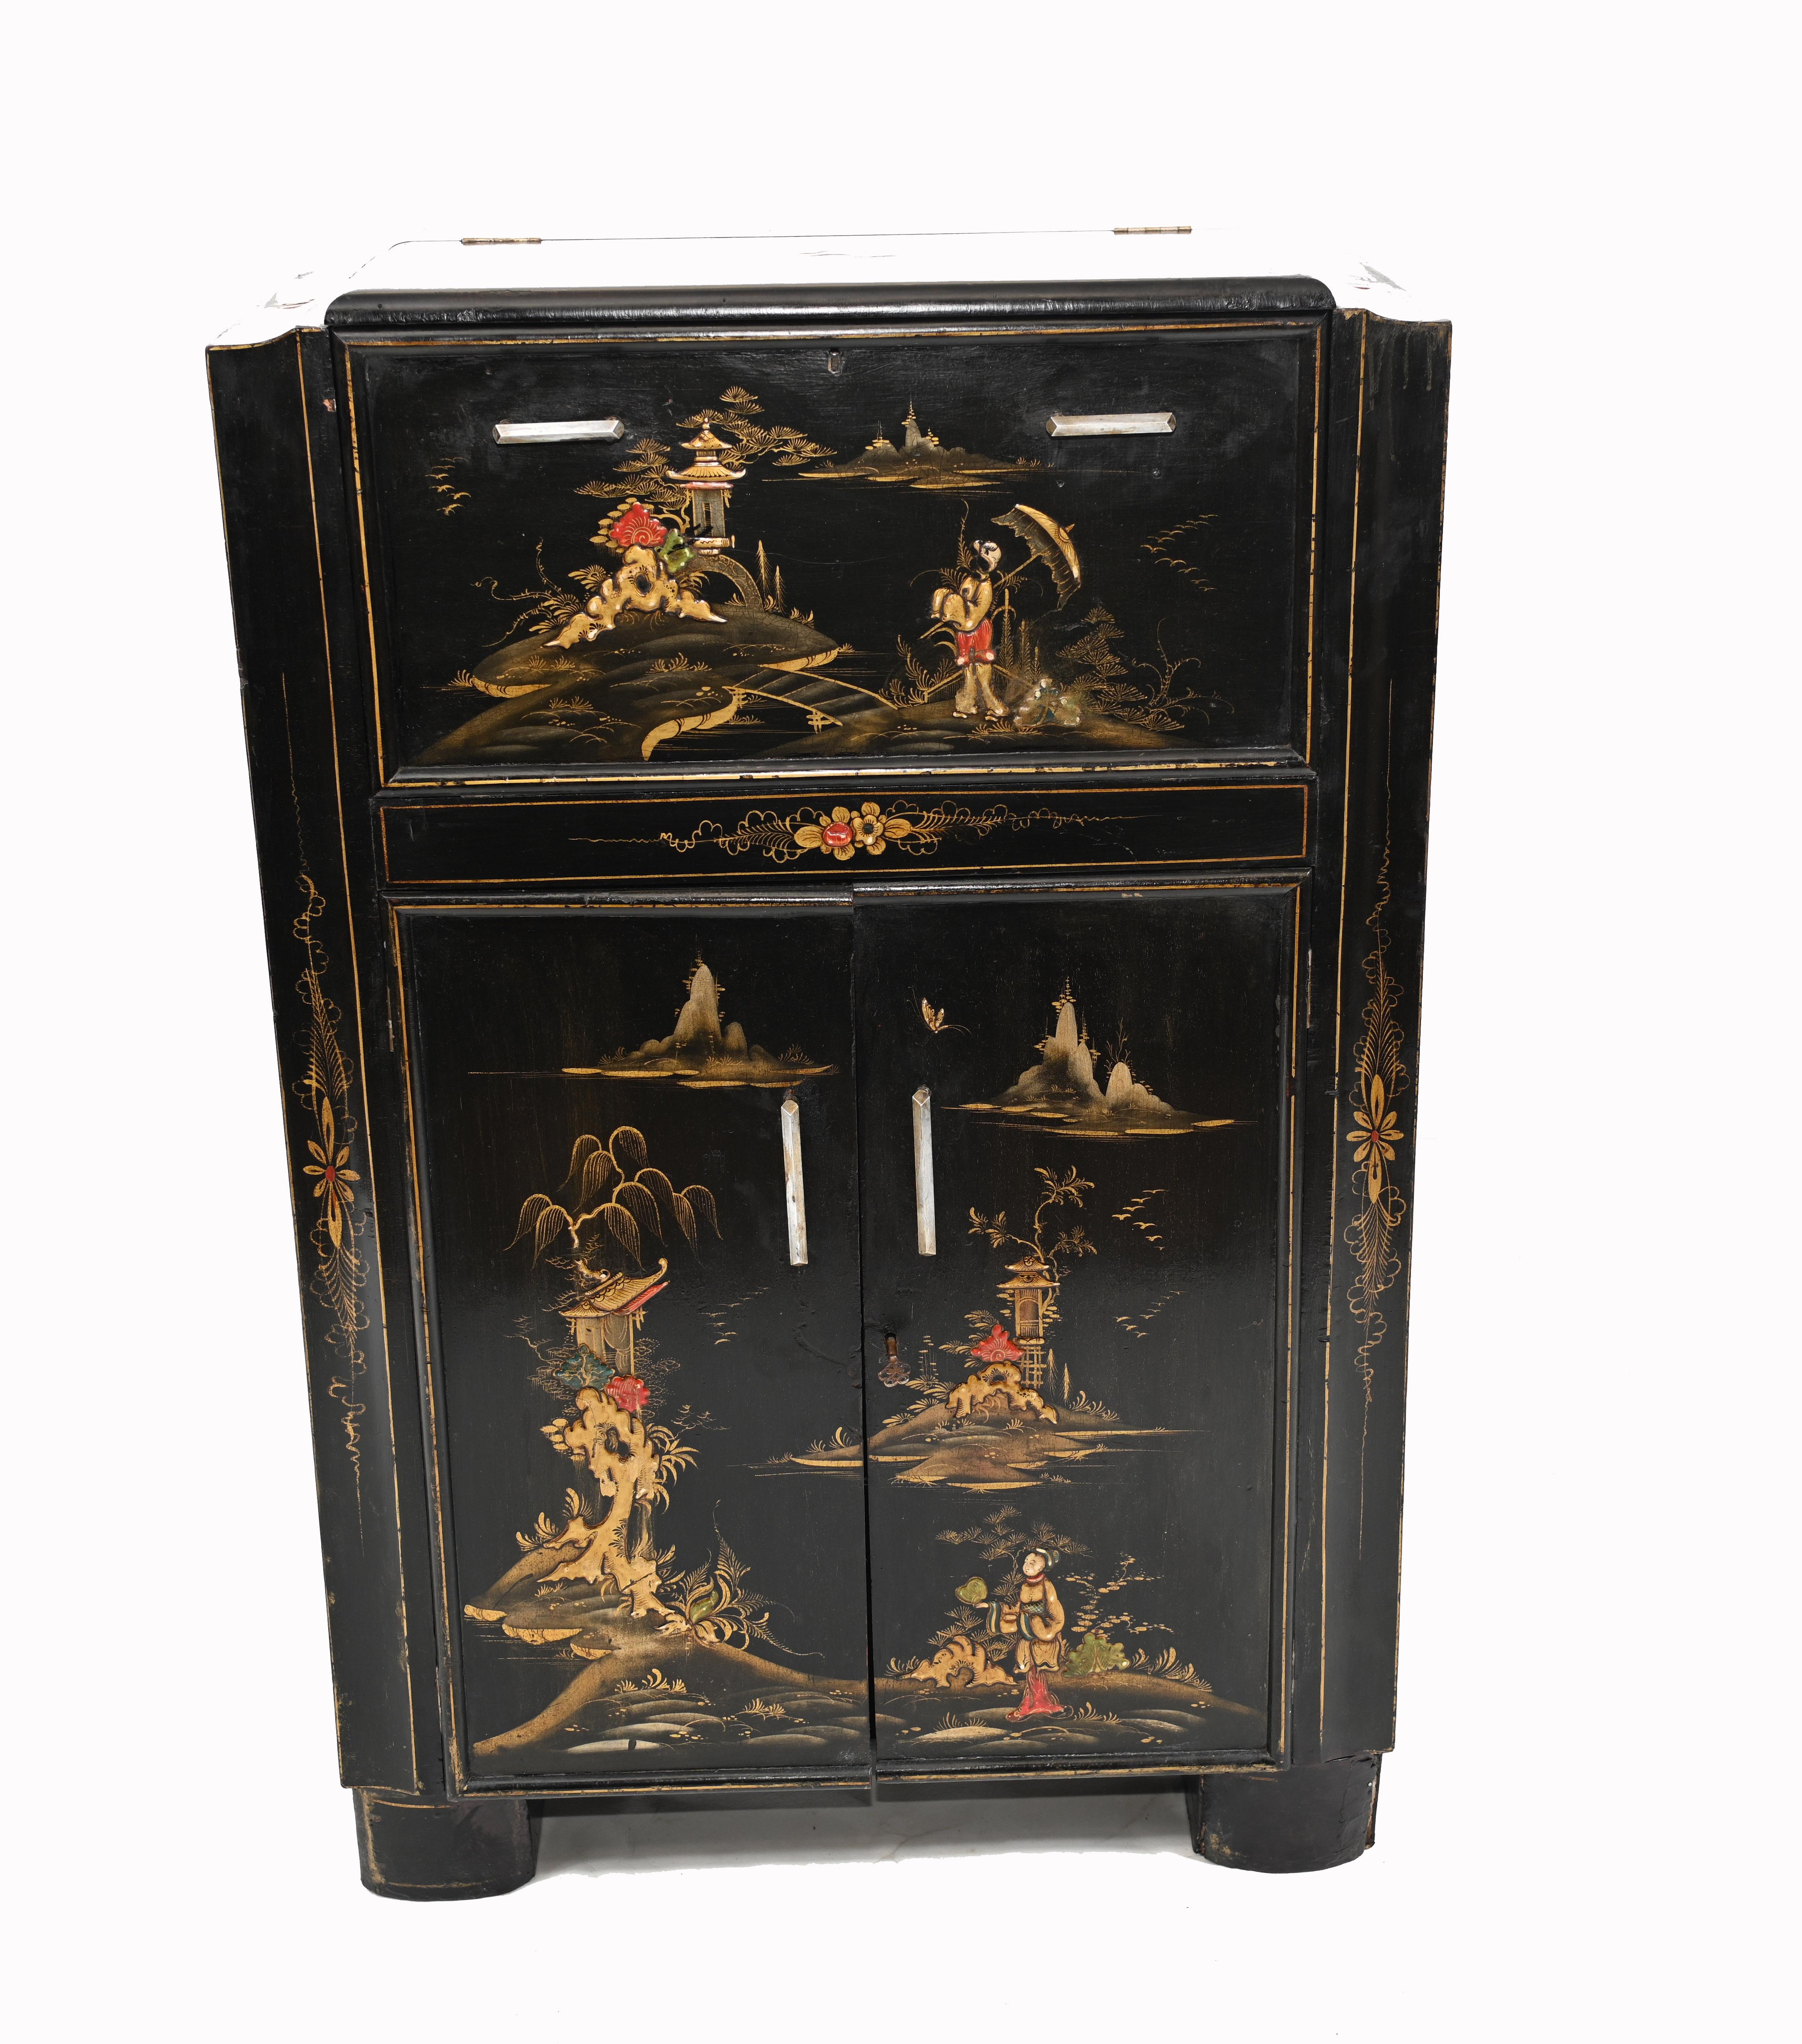 Gorgeous lacquered drinks cabinet decorated with intricate Chinoiserie
Classic cocktail cabinet, top opens out to reveal drink making area
Includes original lemon squeezer and cocktail sticks
We date this to circa 1920 and the painted Chinoserie